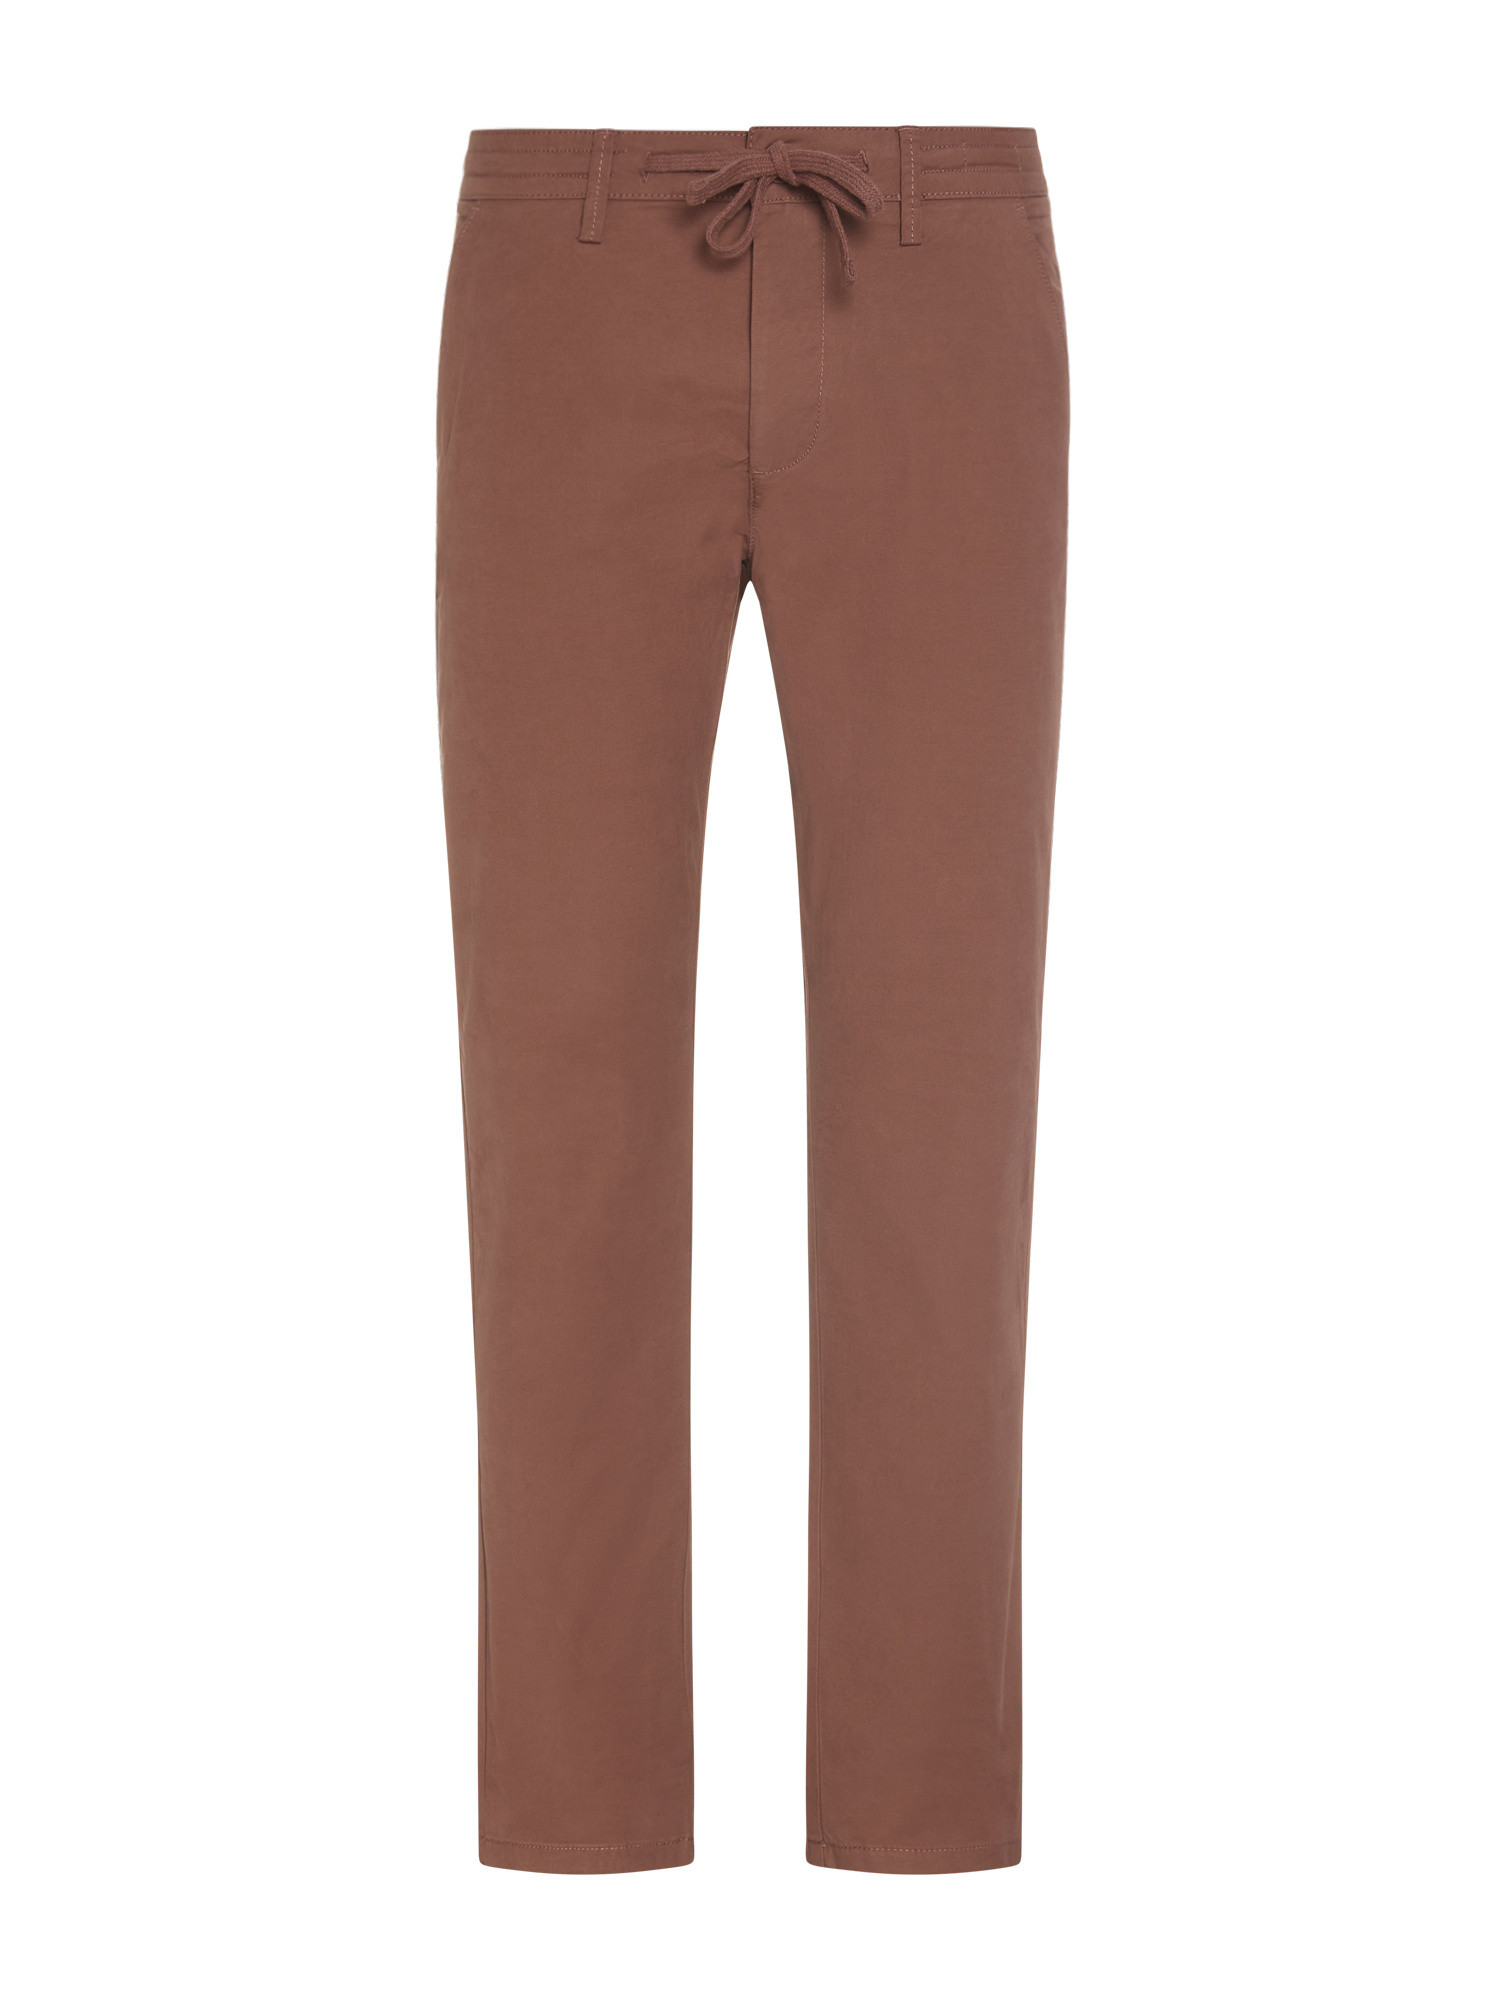 JCT - Jogger chino slim fit, Marrone, large image number 0